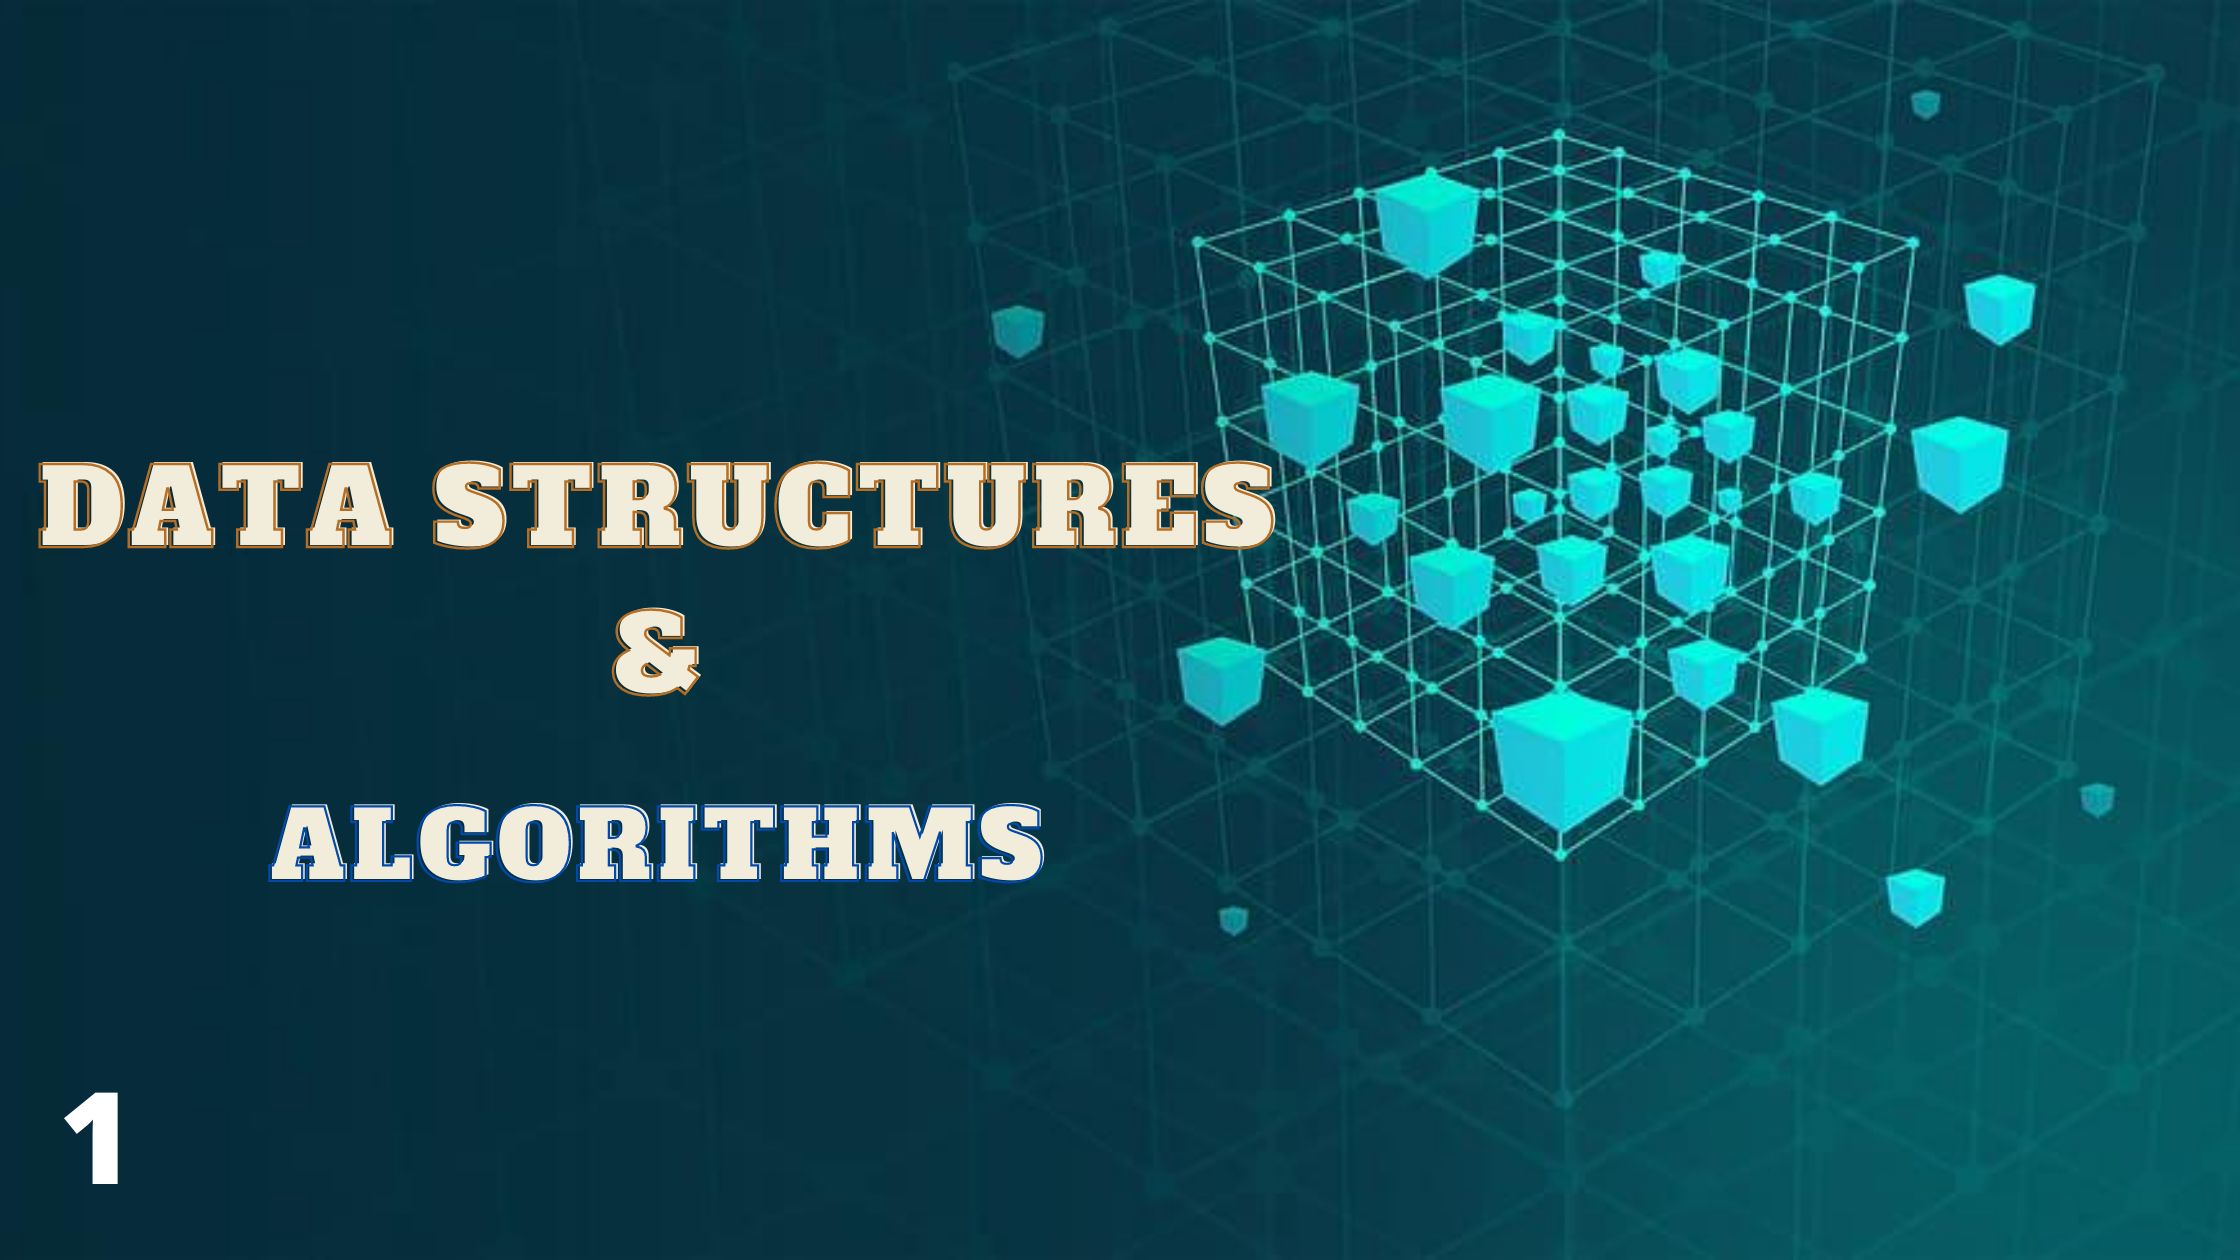 /a-n00bs-guide-to-data-structures-and-algorithms-zg263xq2 feature image